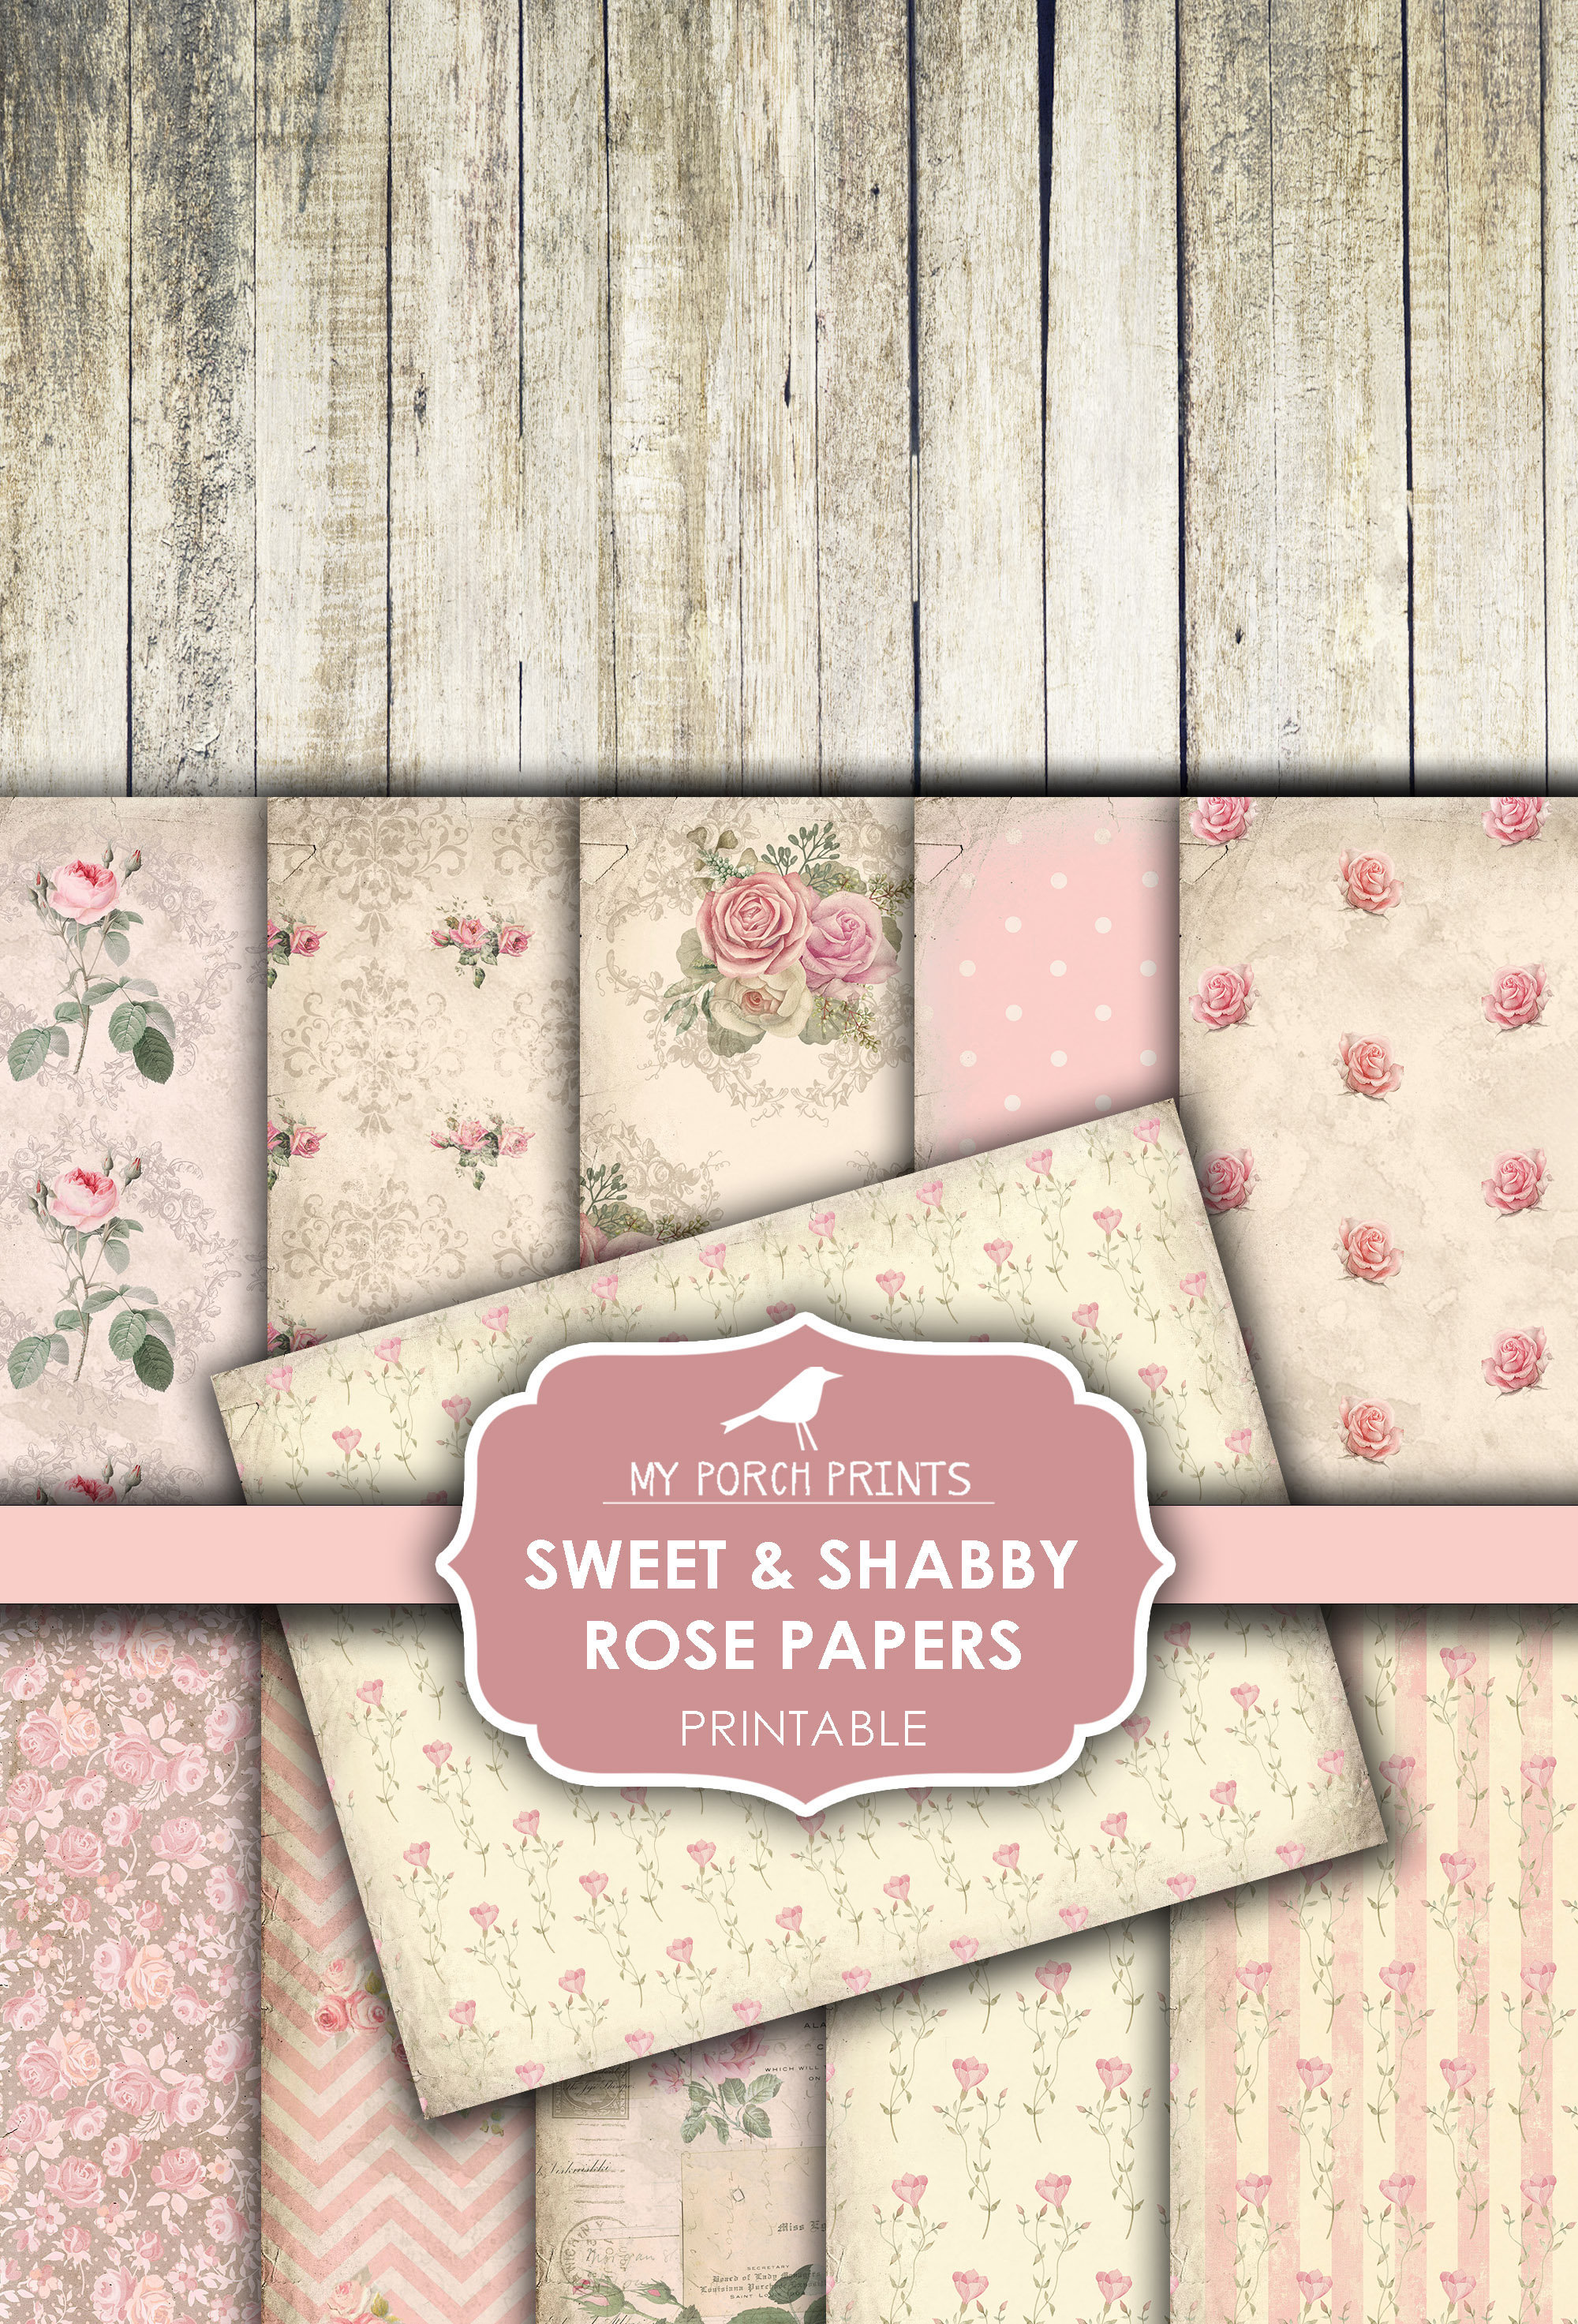 Digital Shabby Pink Papers, Vintage Shabby Download, Printable